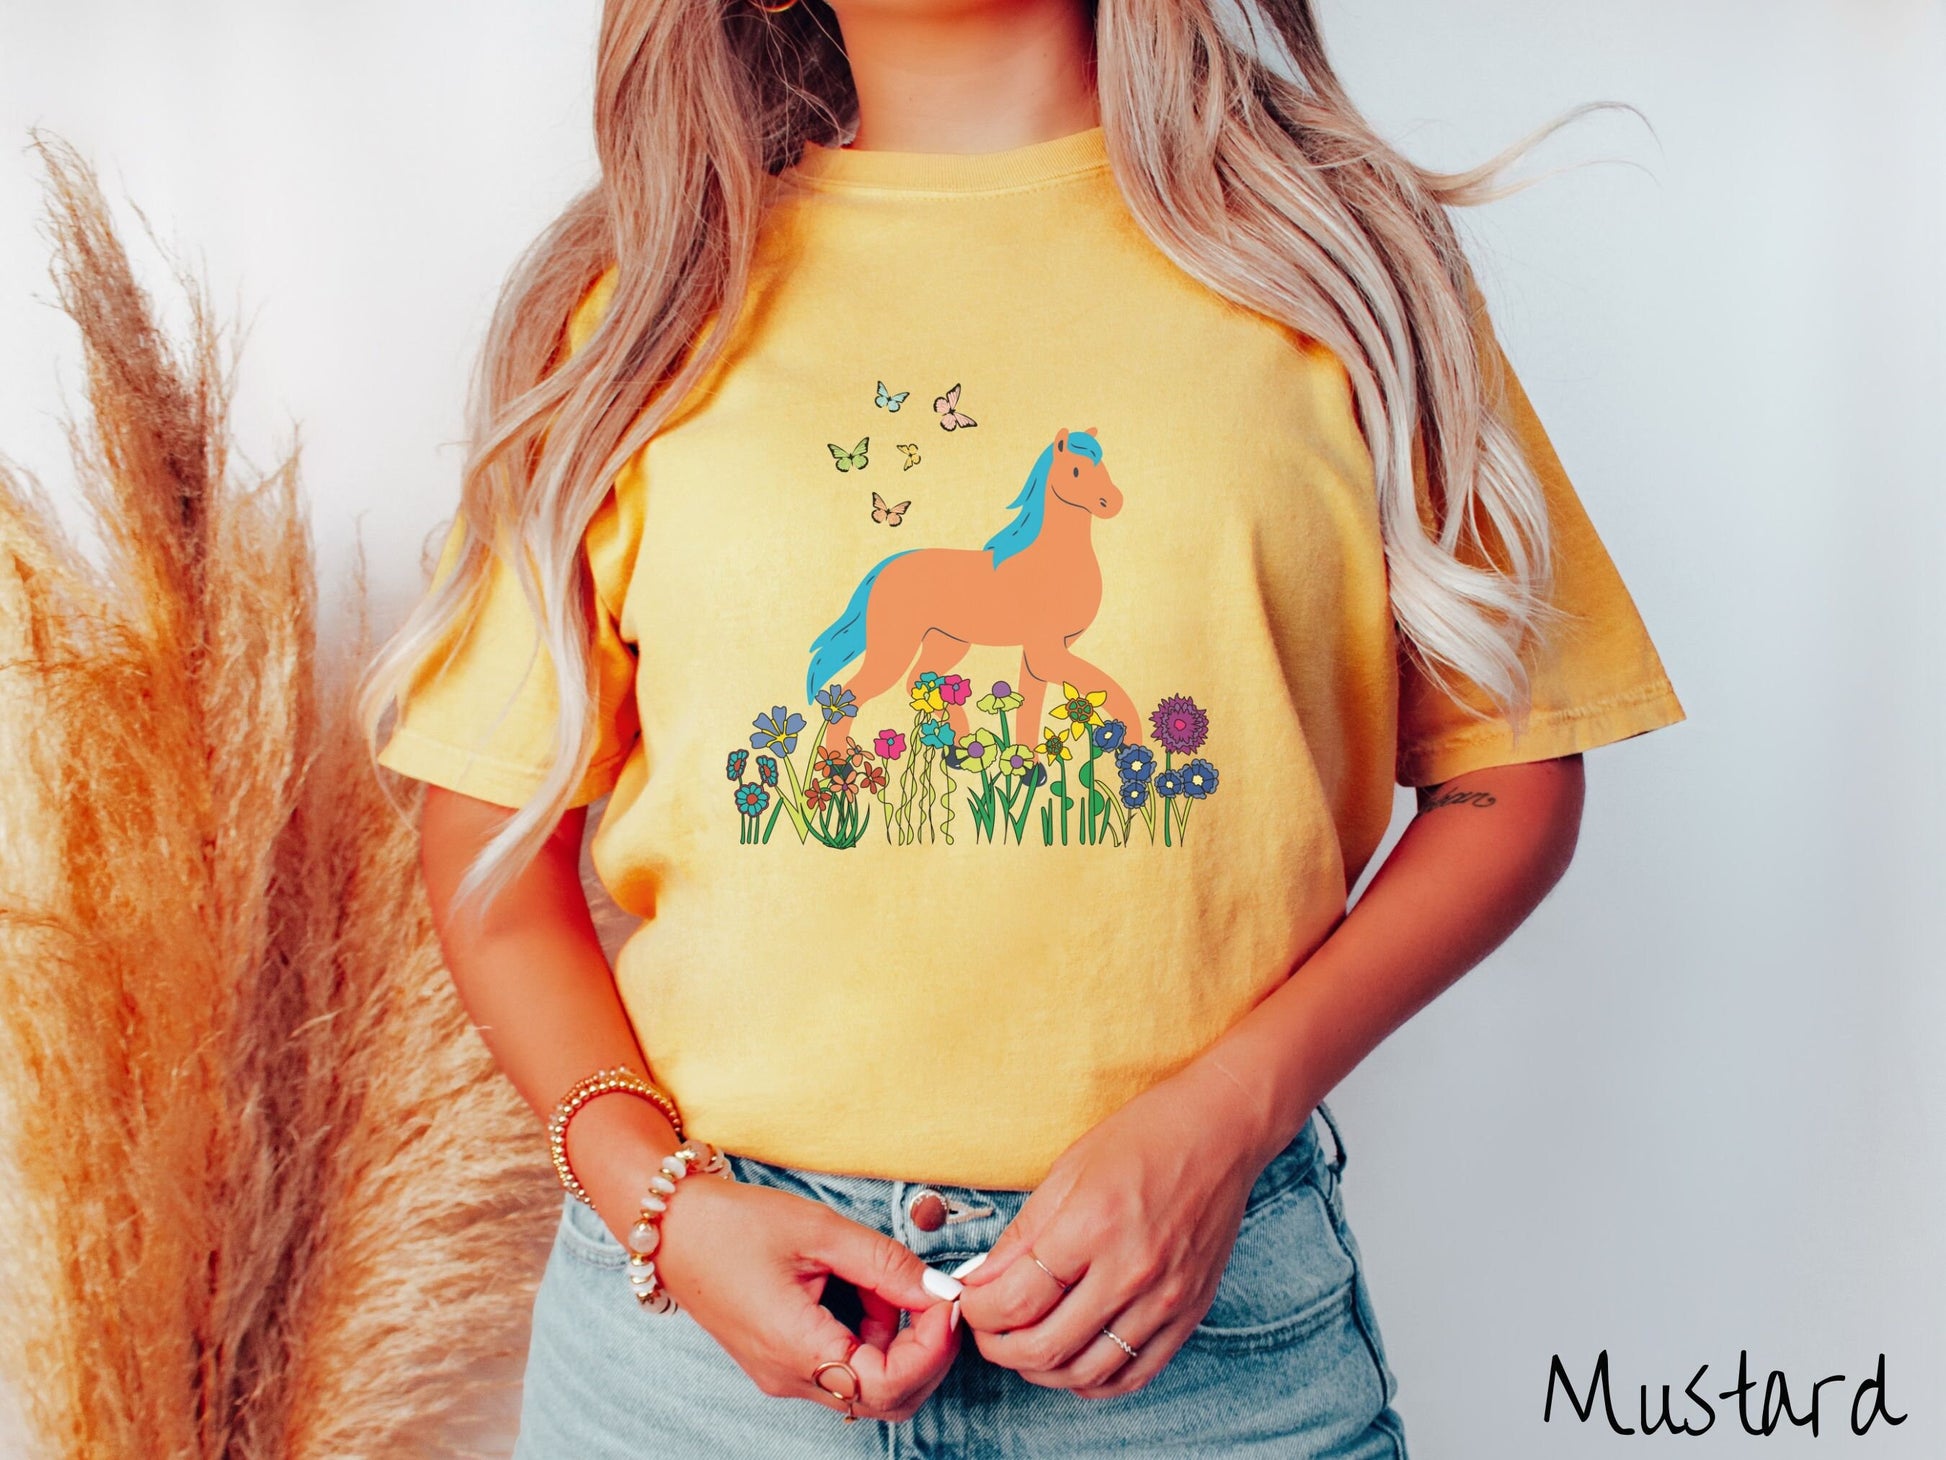 A woman wearing a cute, vintage gold colored Comfort Colors shirt with a brown horse with blue hair walking through a field of colorful flowers and grass. There are colorful butterflies flying above the horse.